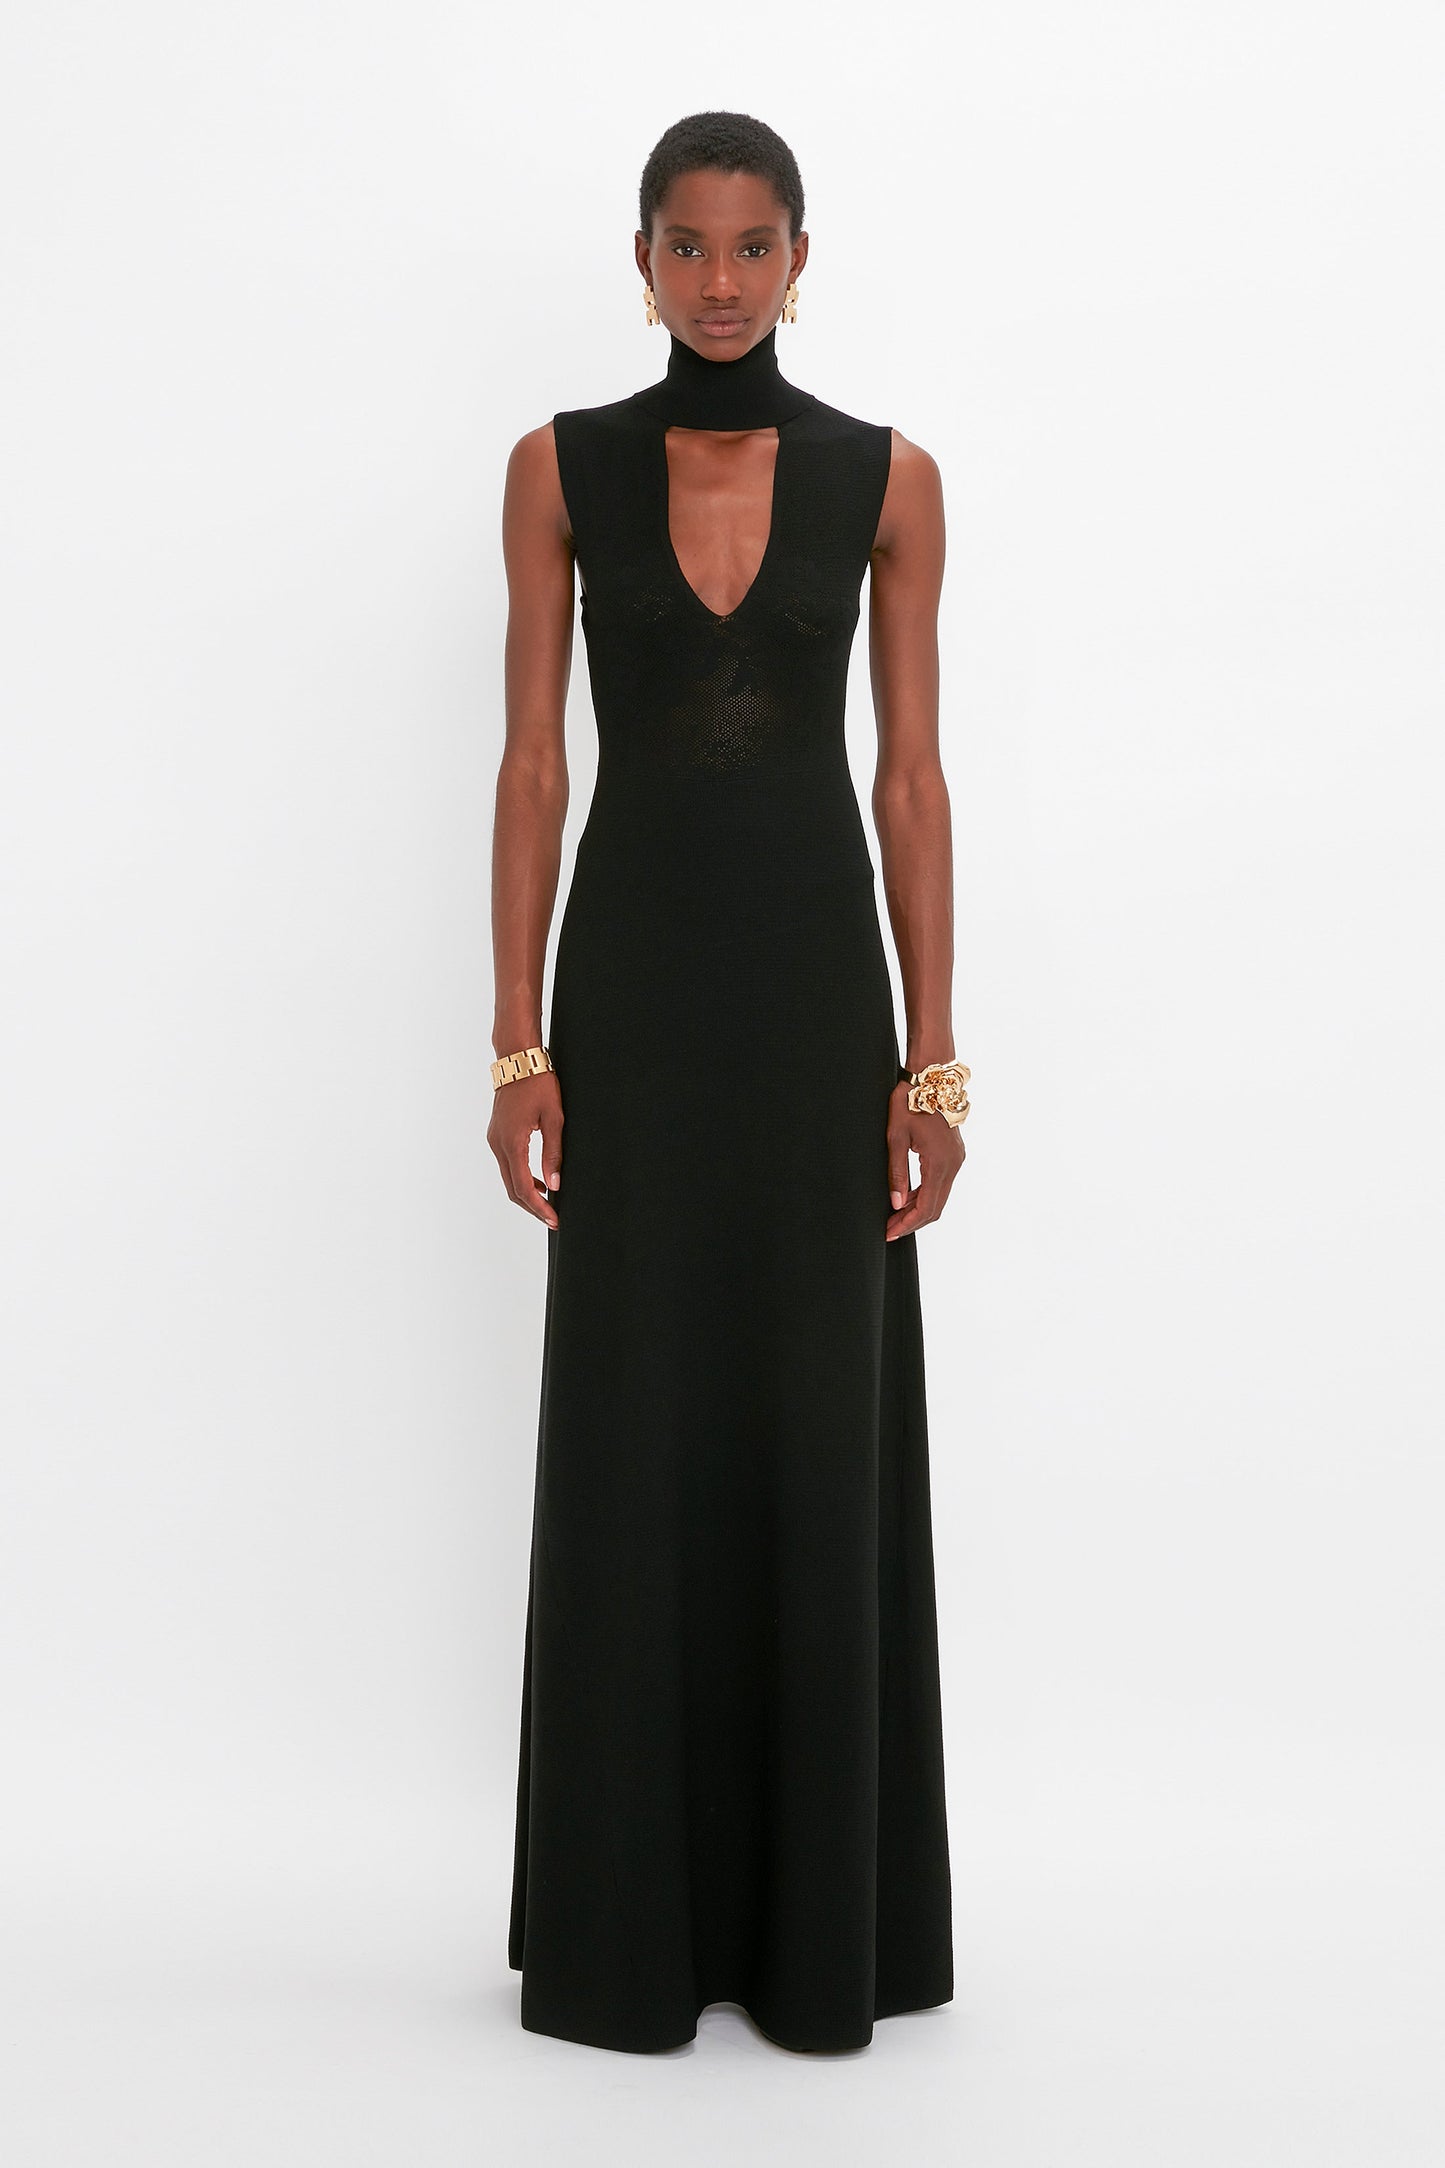 Cut Out Front Floor-Length Dress In Black